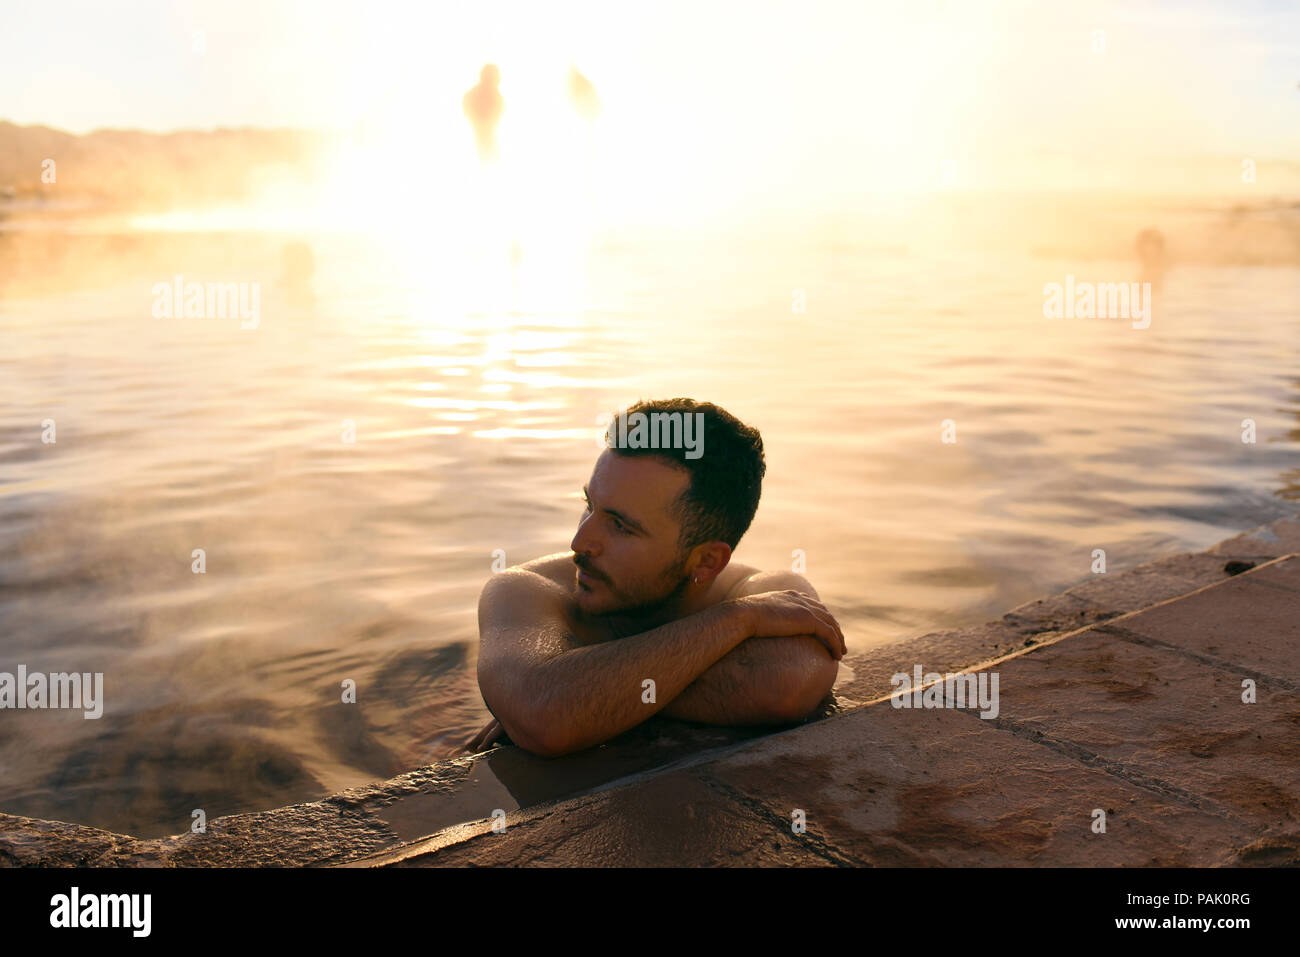 Man bathing in the hot springs, with sunrise lit steam rising in the background. Termas de Polques, Sud Lípez province, Bolivia. Stock Photo